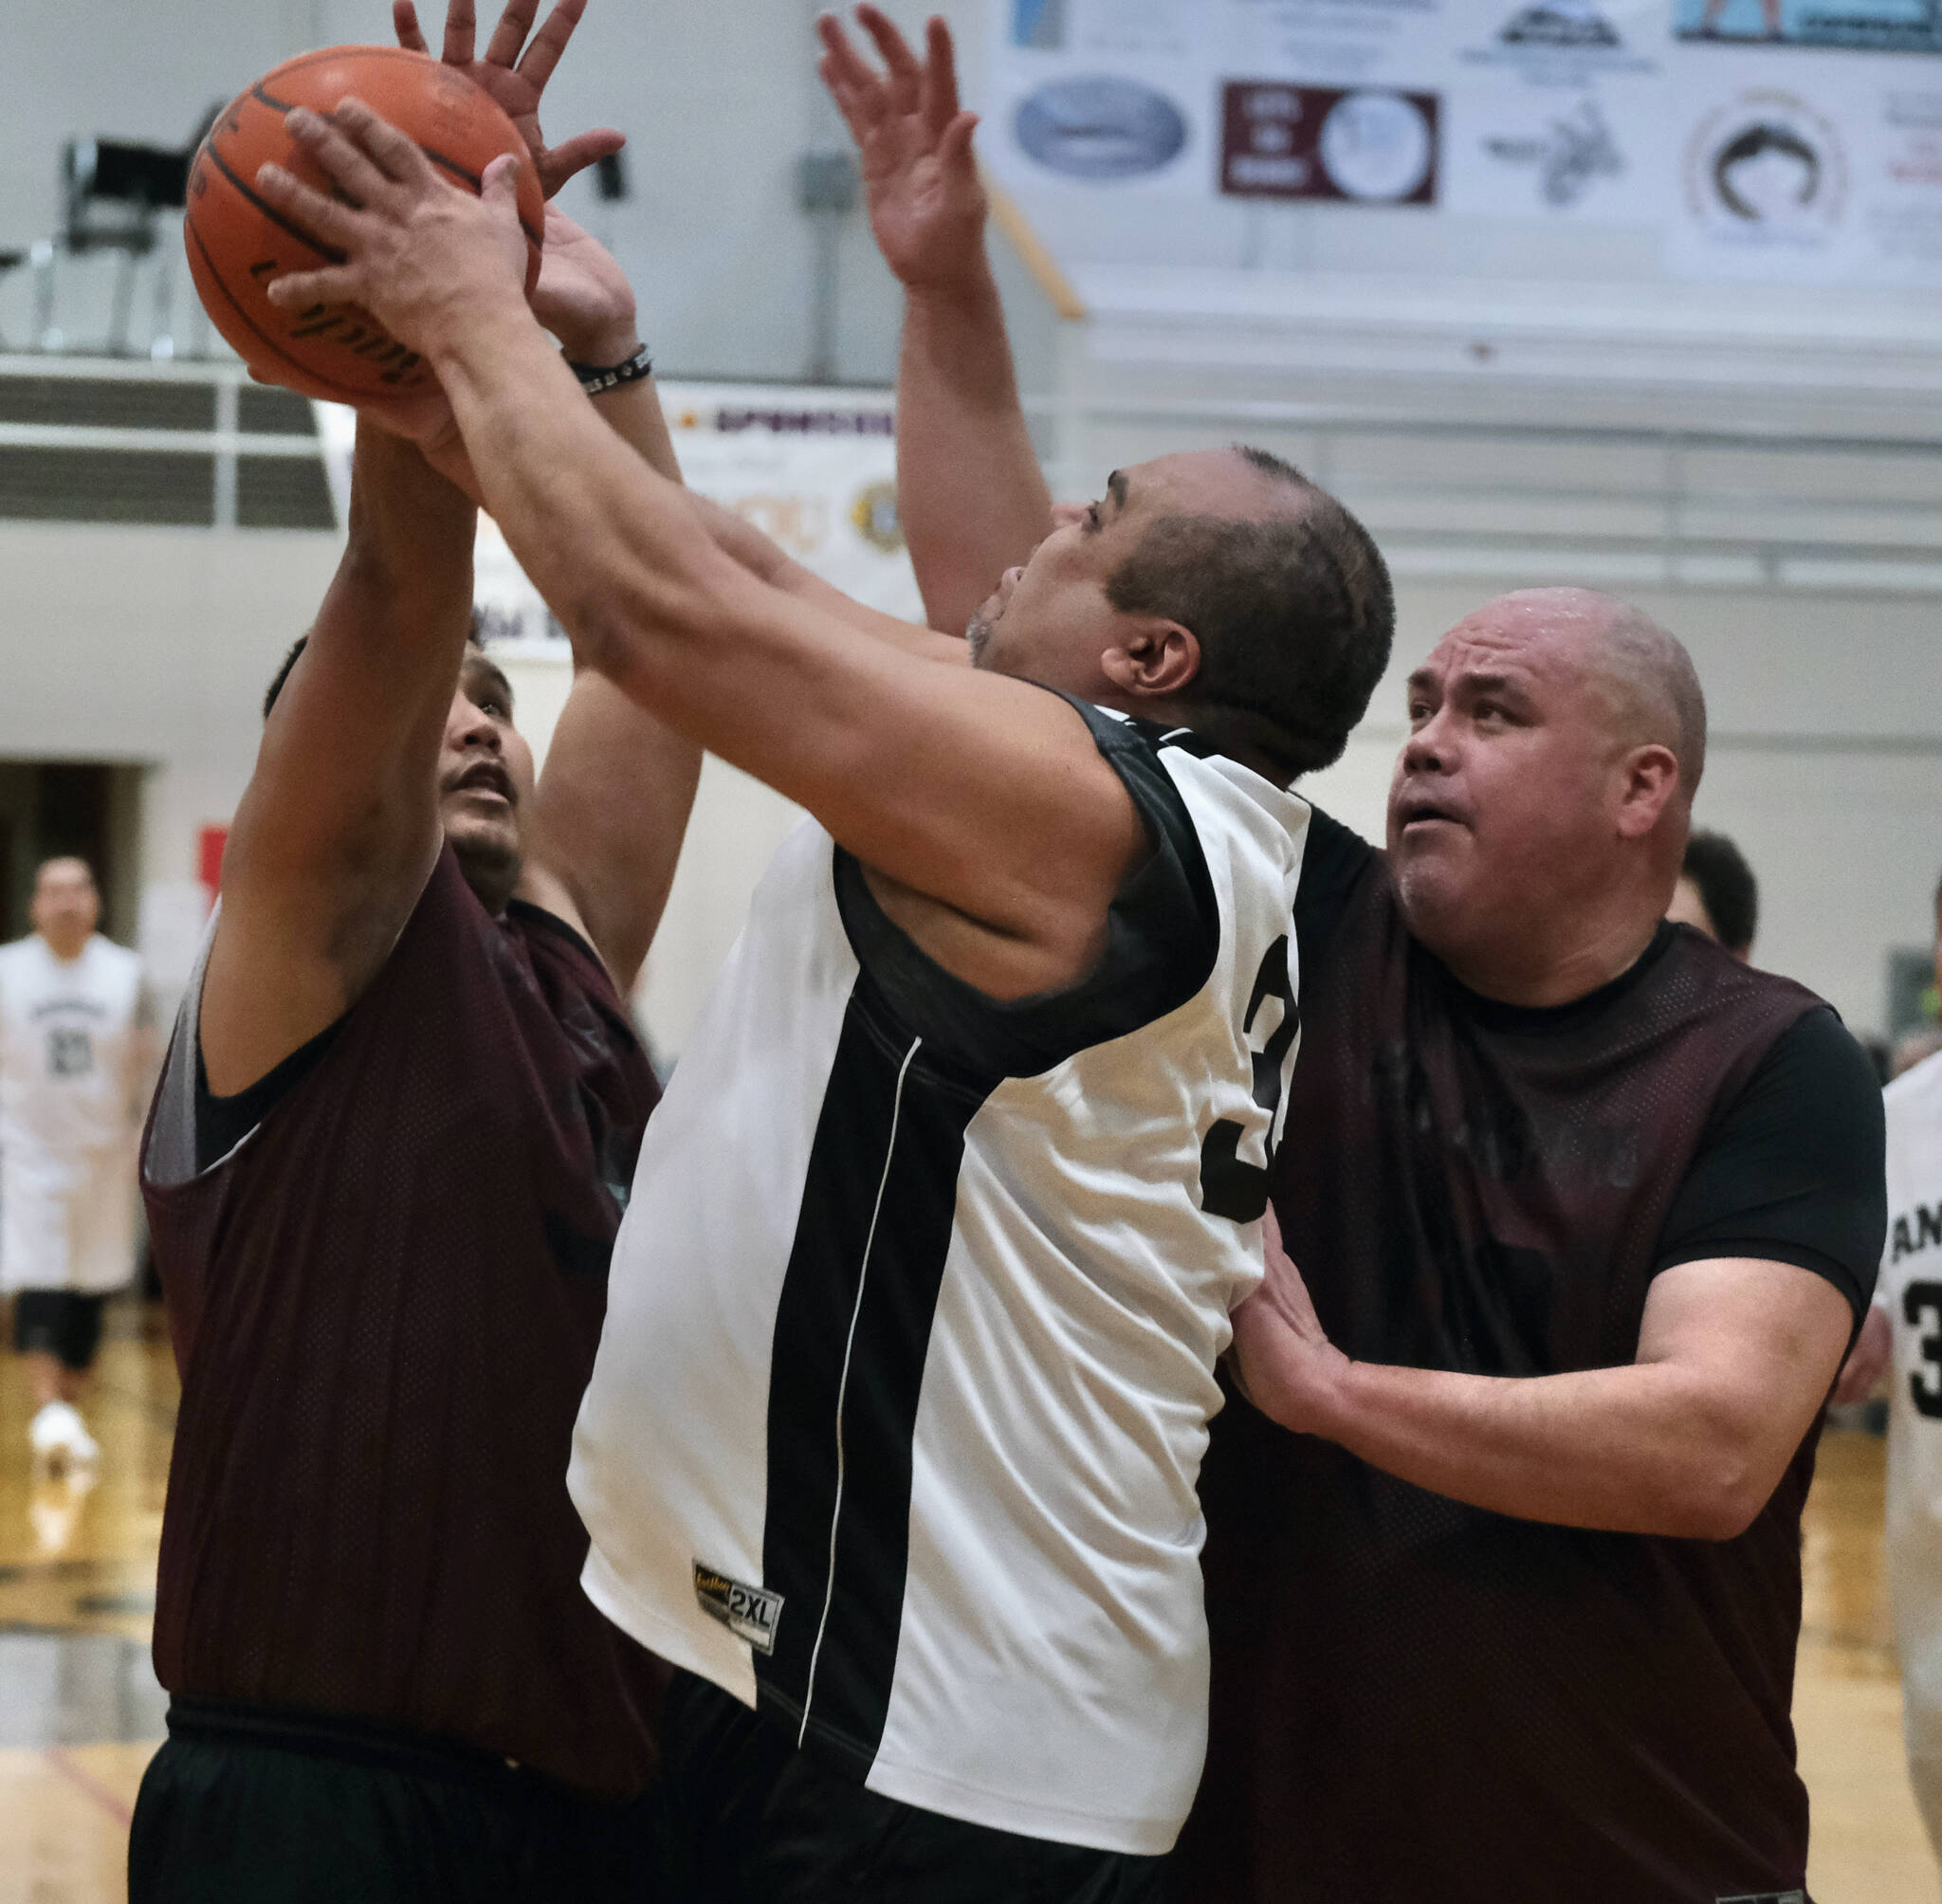 Angoon’s Albert Kookesh shoots against Hoonah’s Gary Smith and Andy Gray during the Gold Medal tournament, Wednesday, March 22, at Juneau-Douglas High School: Yadaa.at Kalé. (Klas Stolpe/For the Juneau Empire)